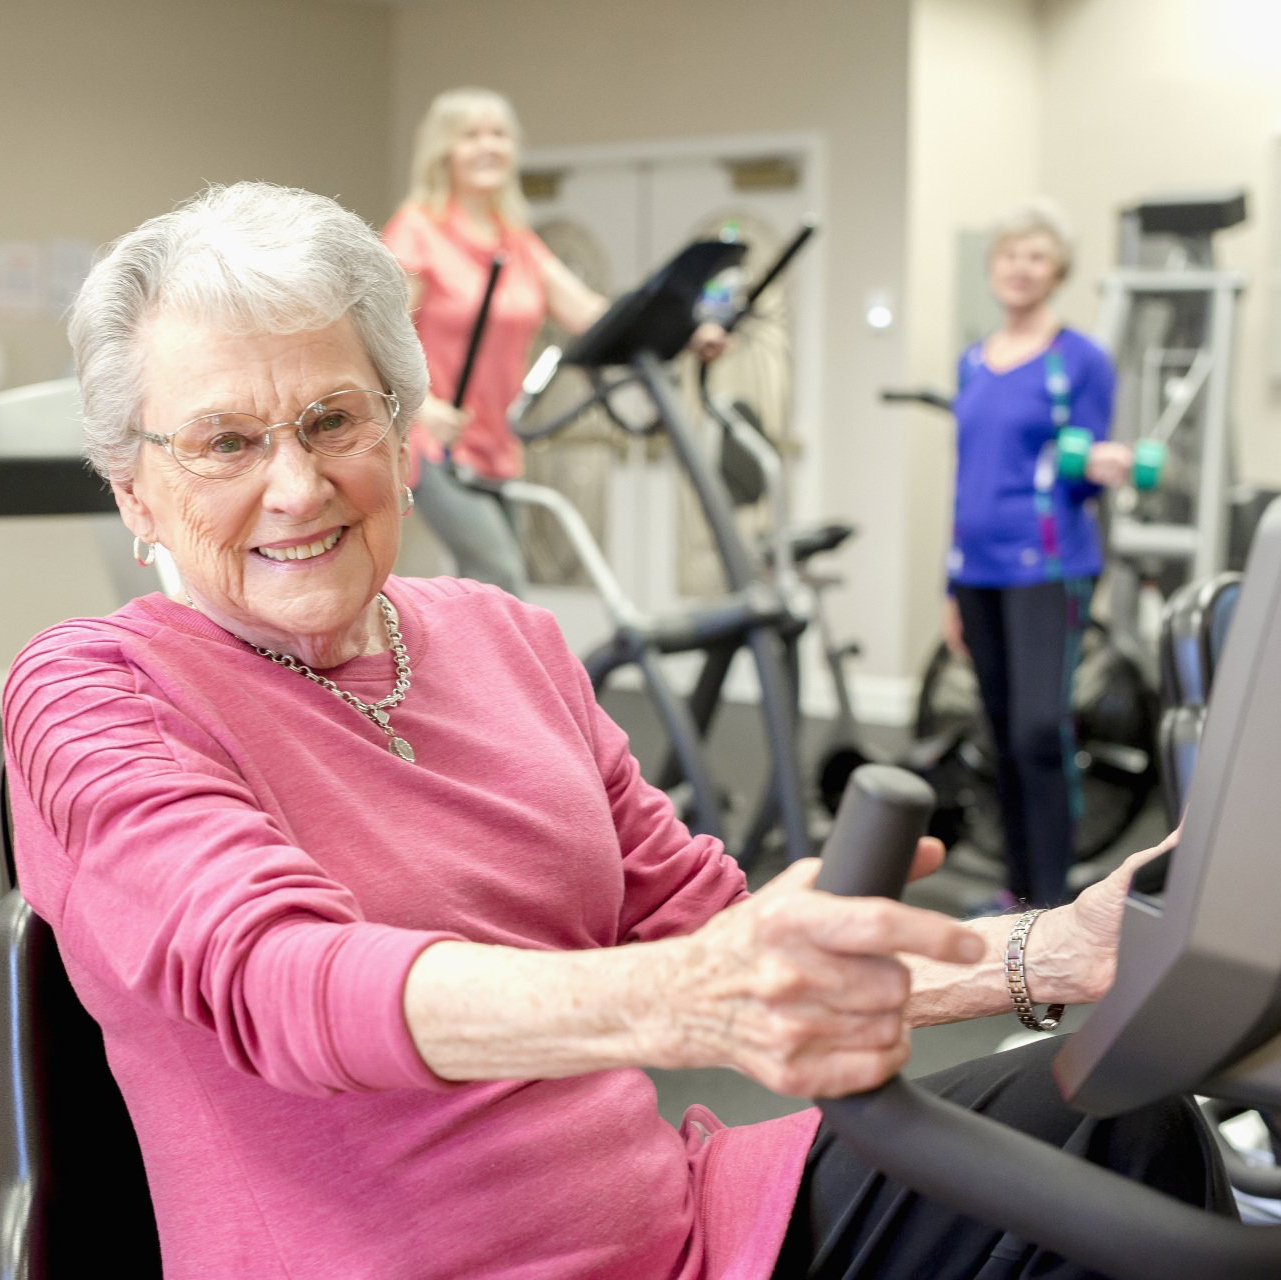 Retired lady exercising on a seated bike in the fitness center of 55+ community